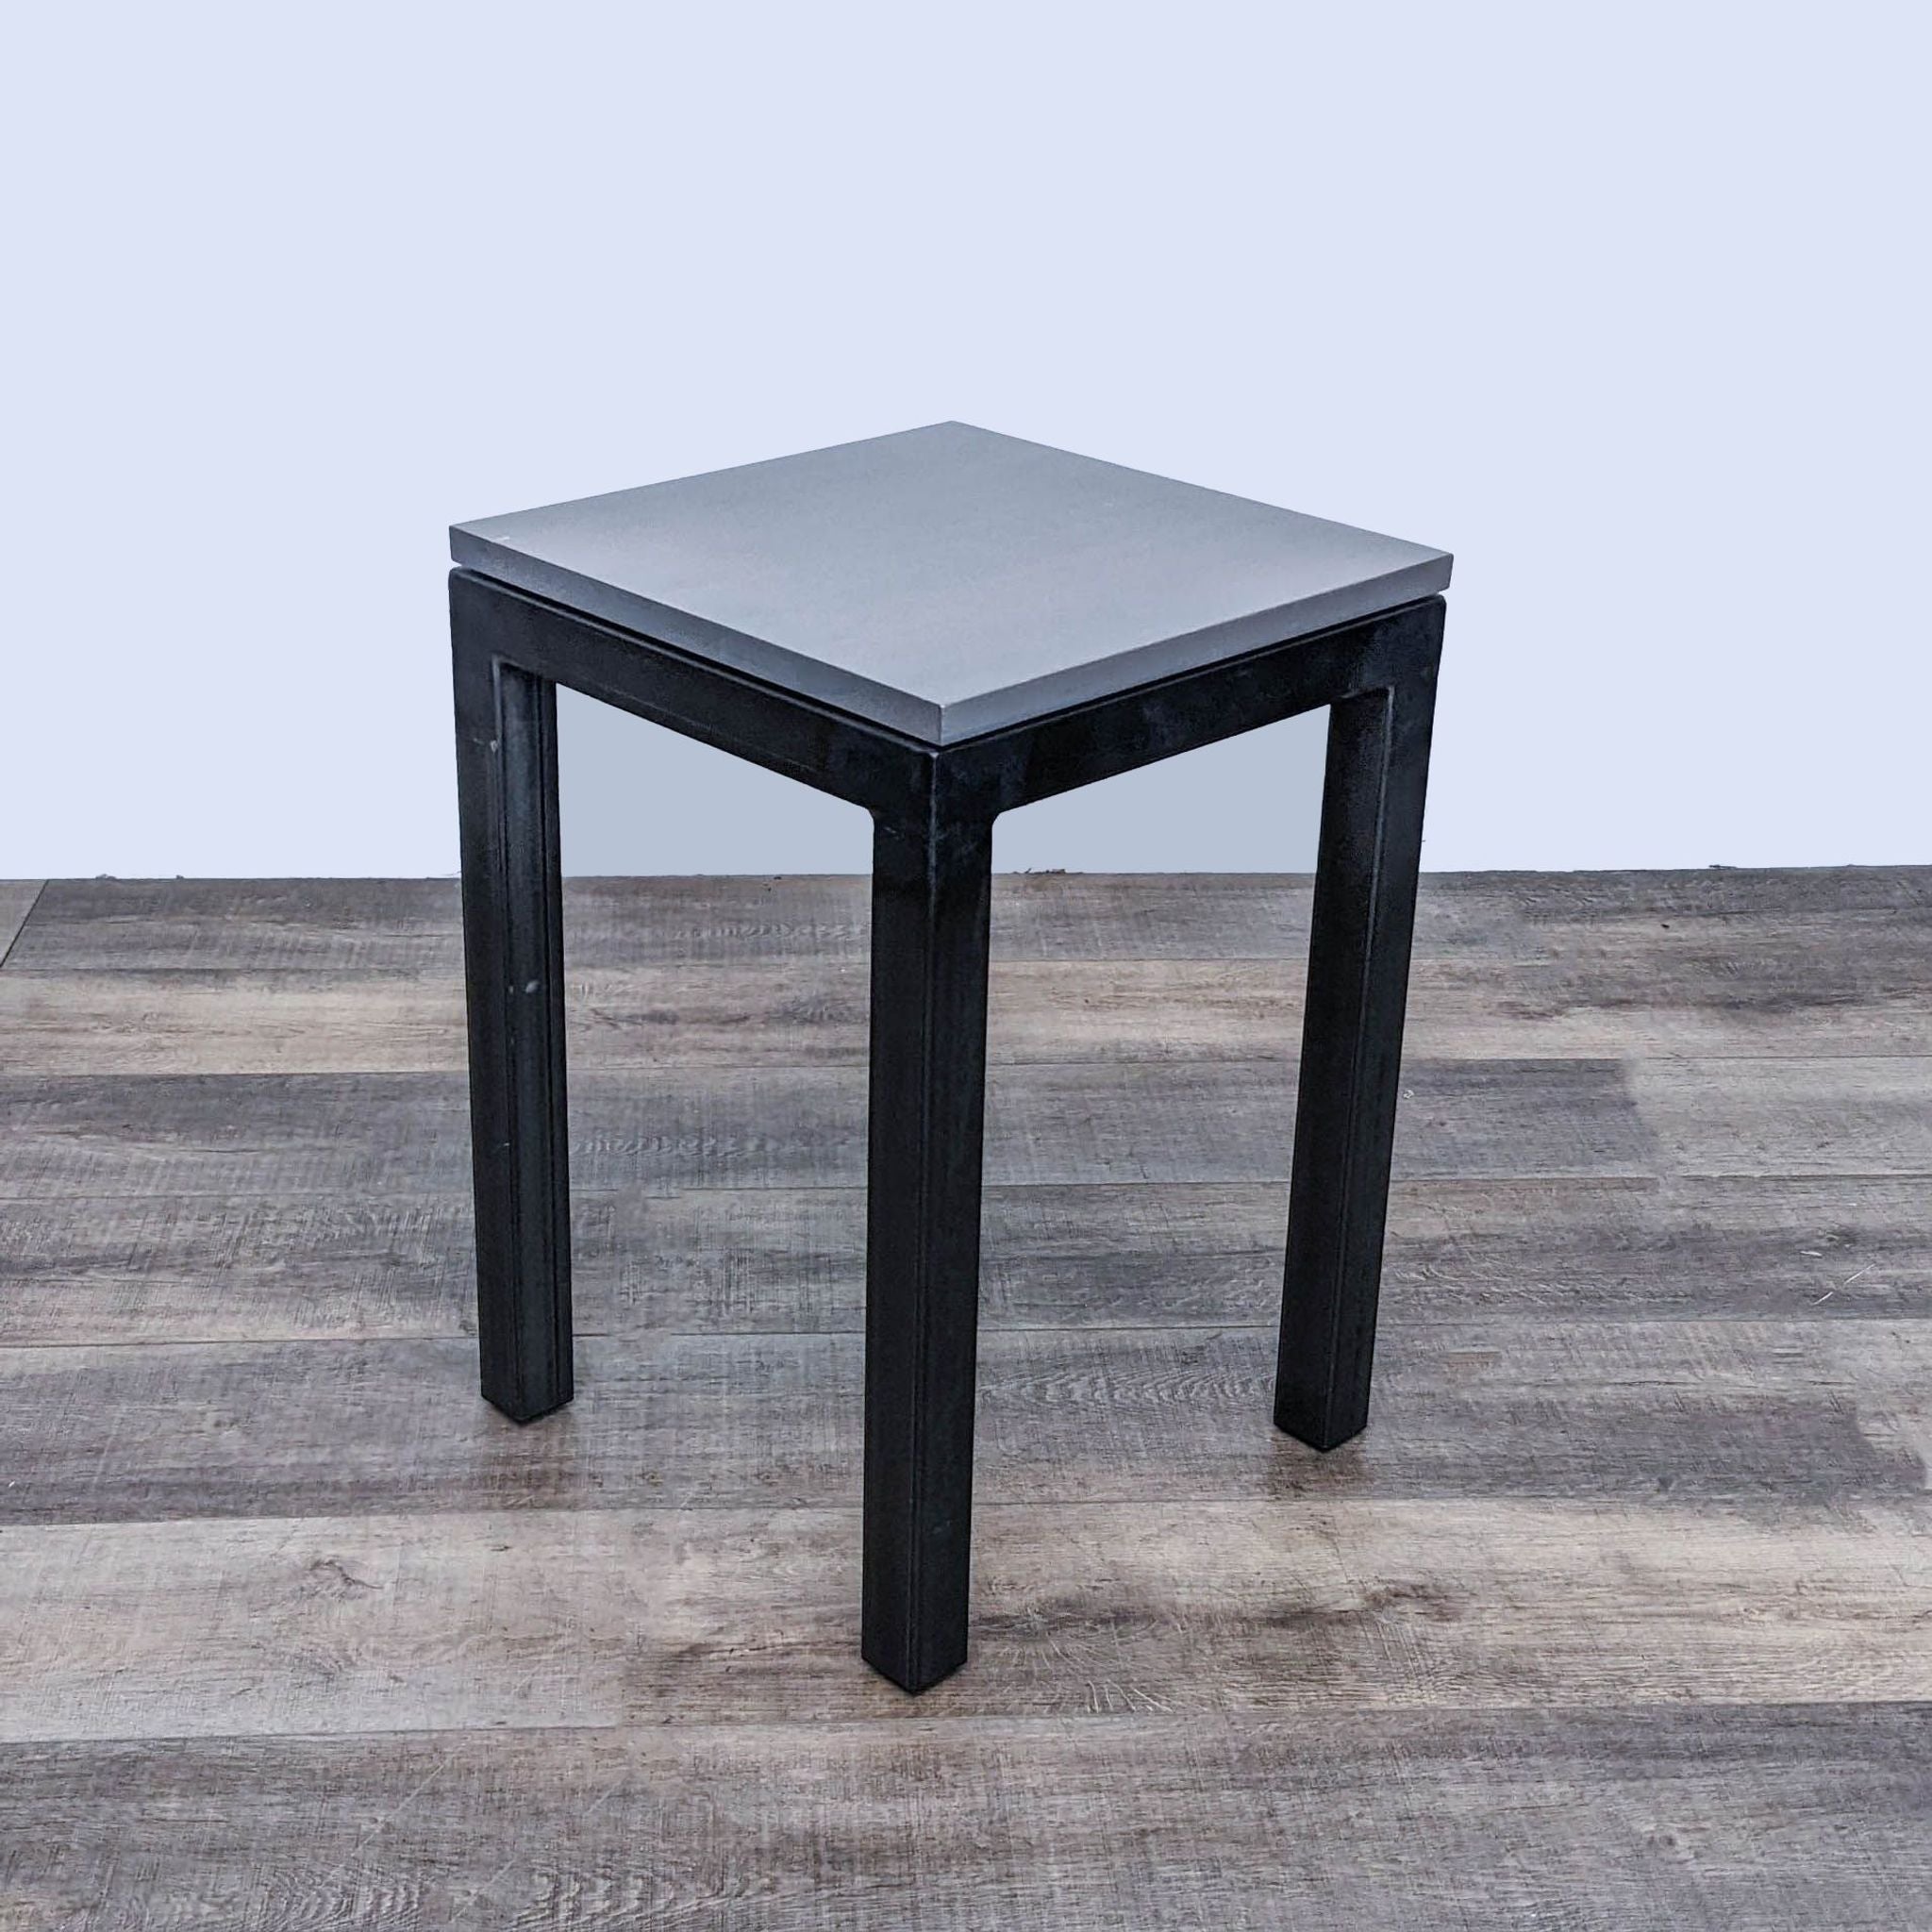 A sleek, modern console table by Room & Board with a metallic surface and dark legs, against a wooden background.